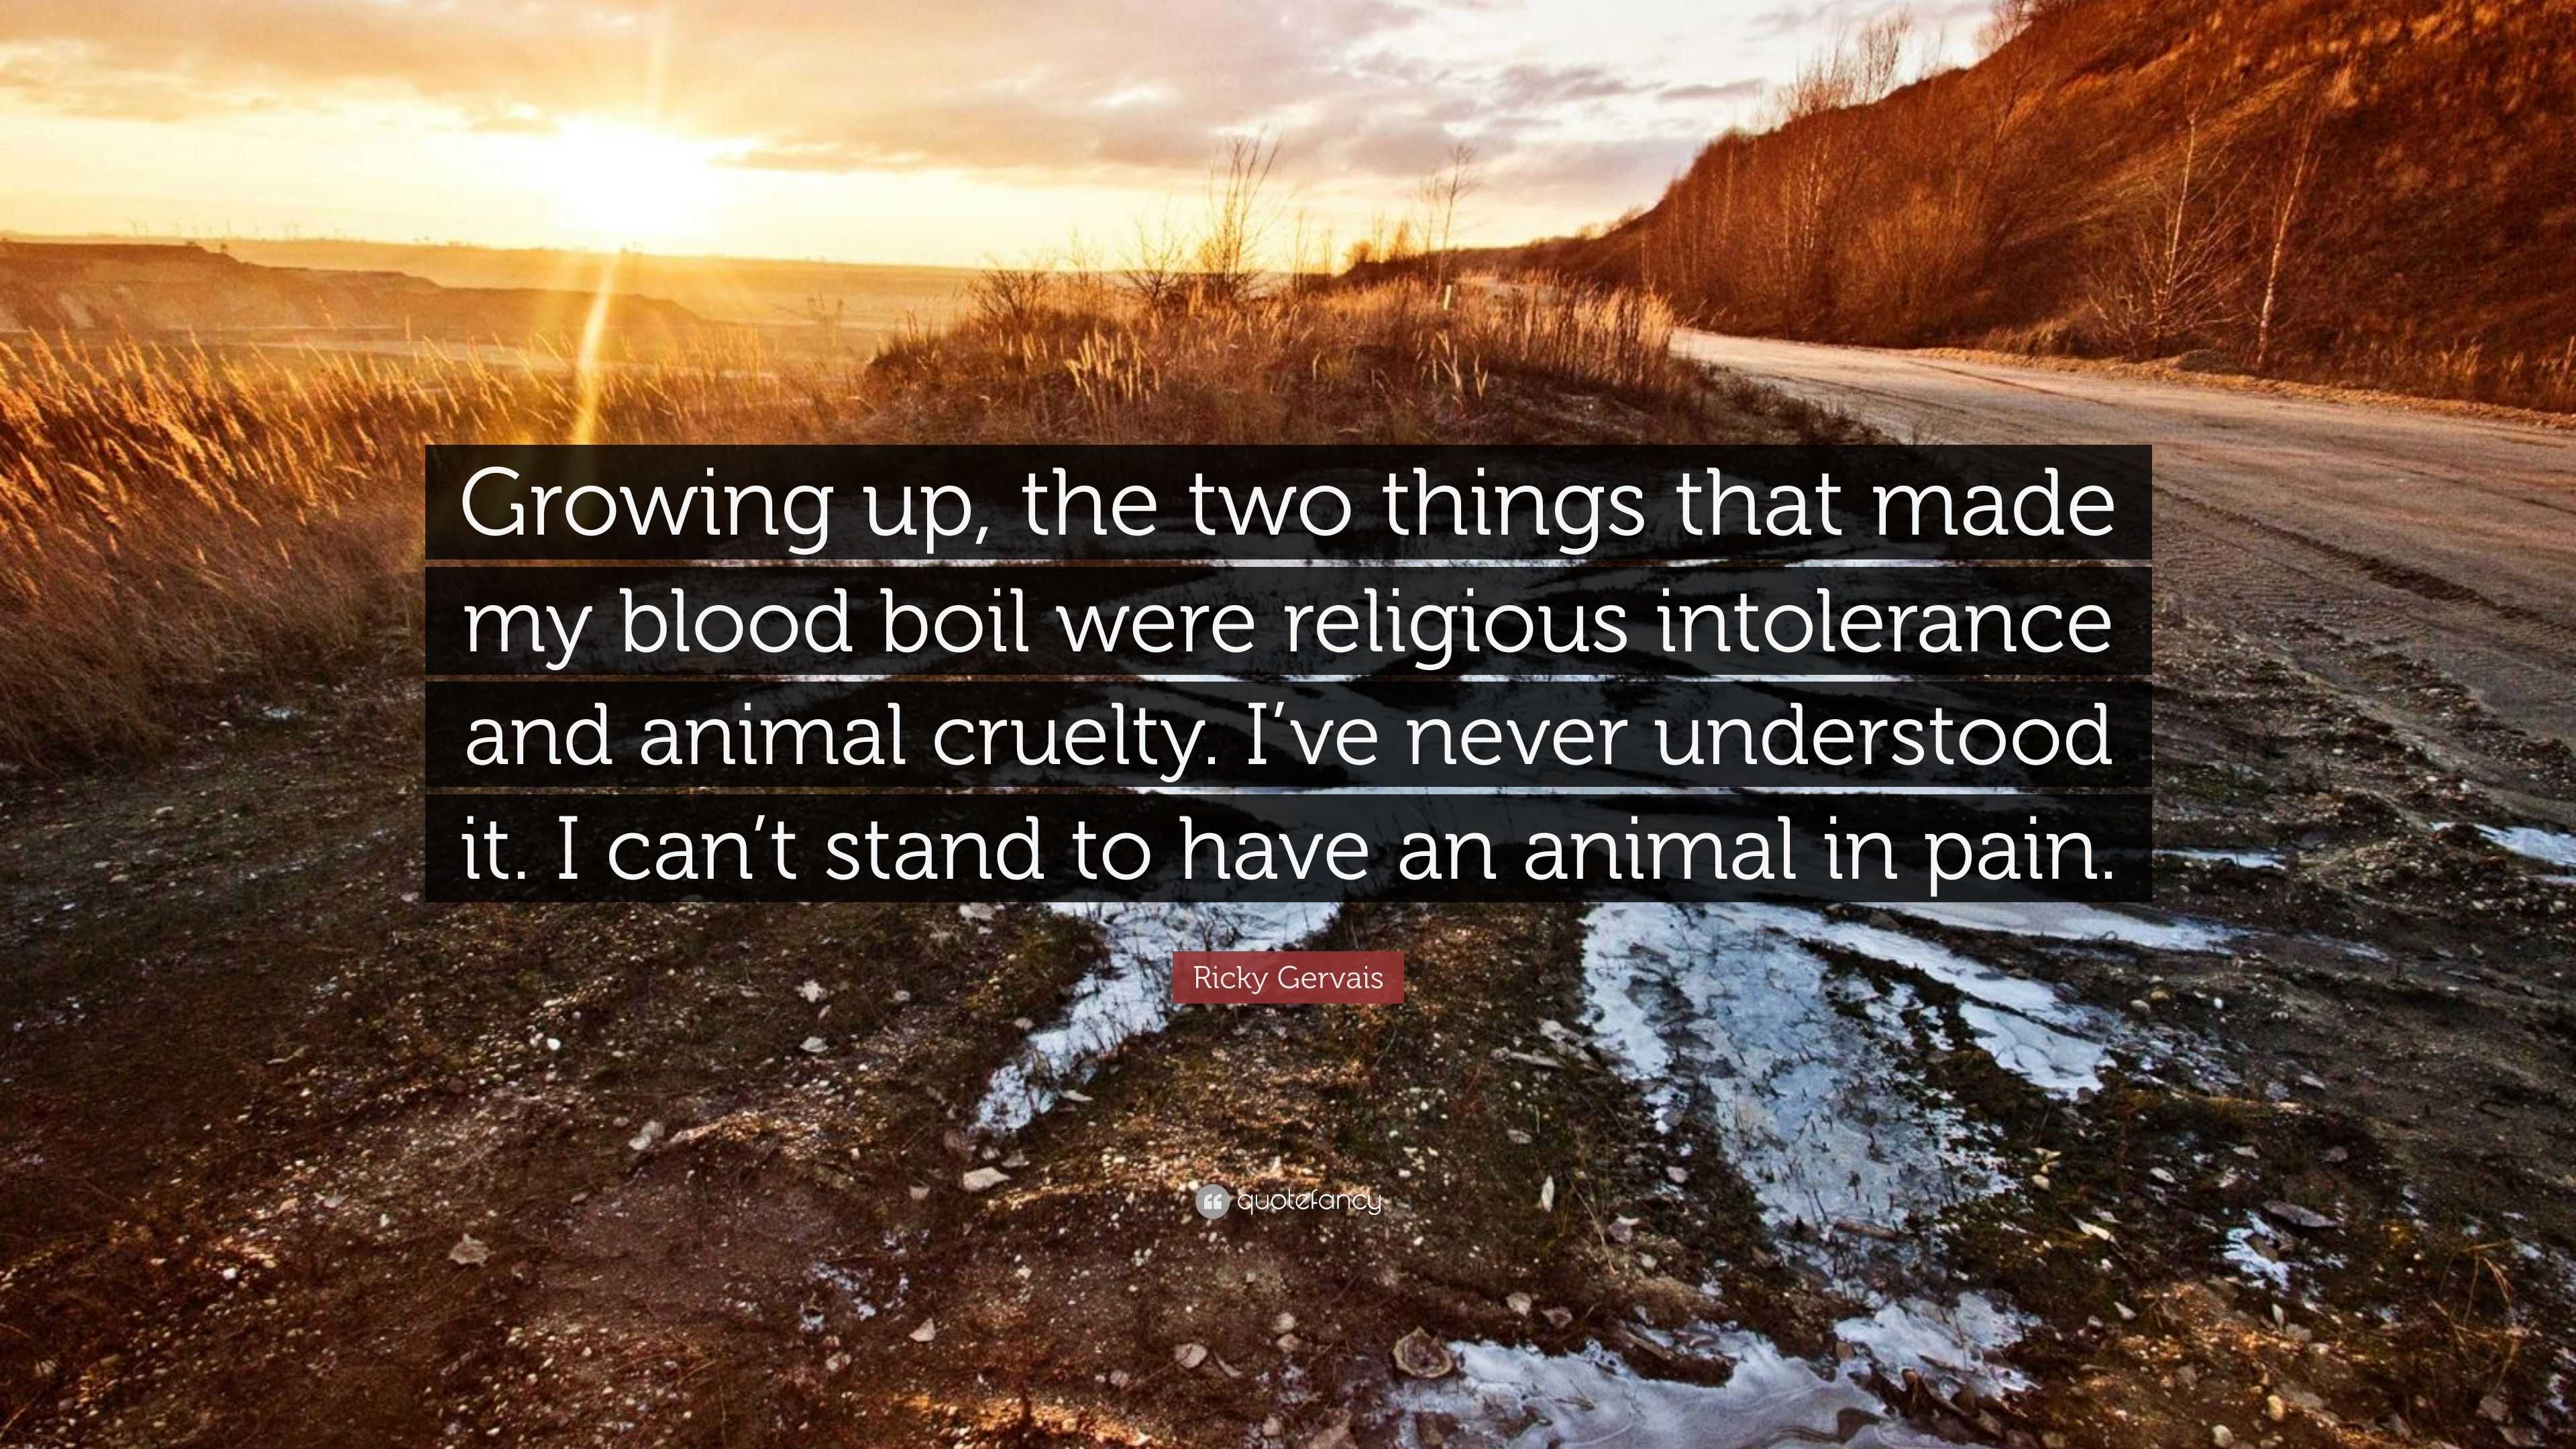 Ricky Gervais Quote: “Growing up, the two things that made my blood boil  were religious intolerance and animal cruelty. I've never understood ...”